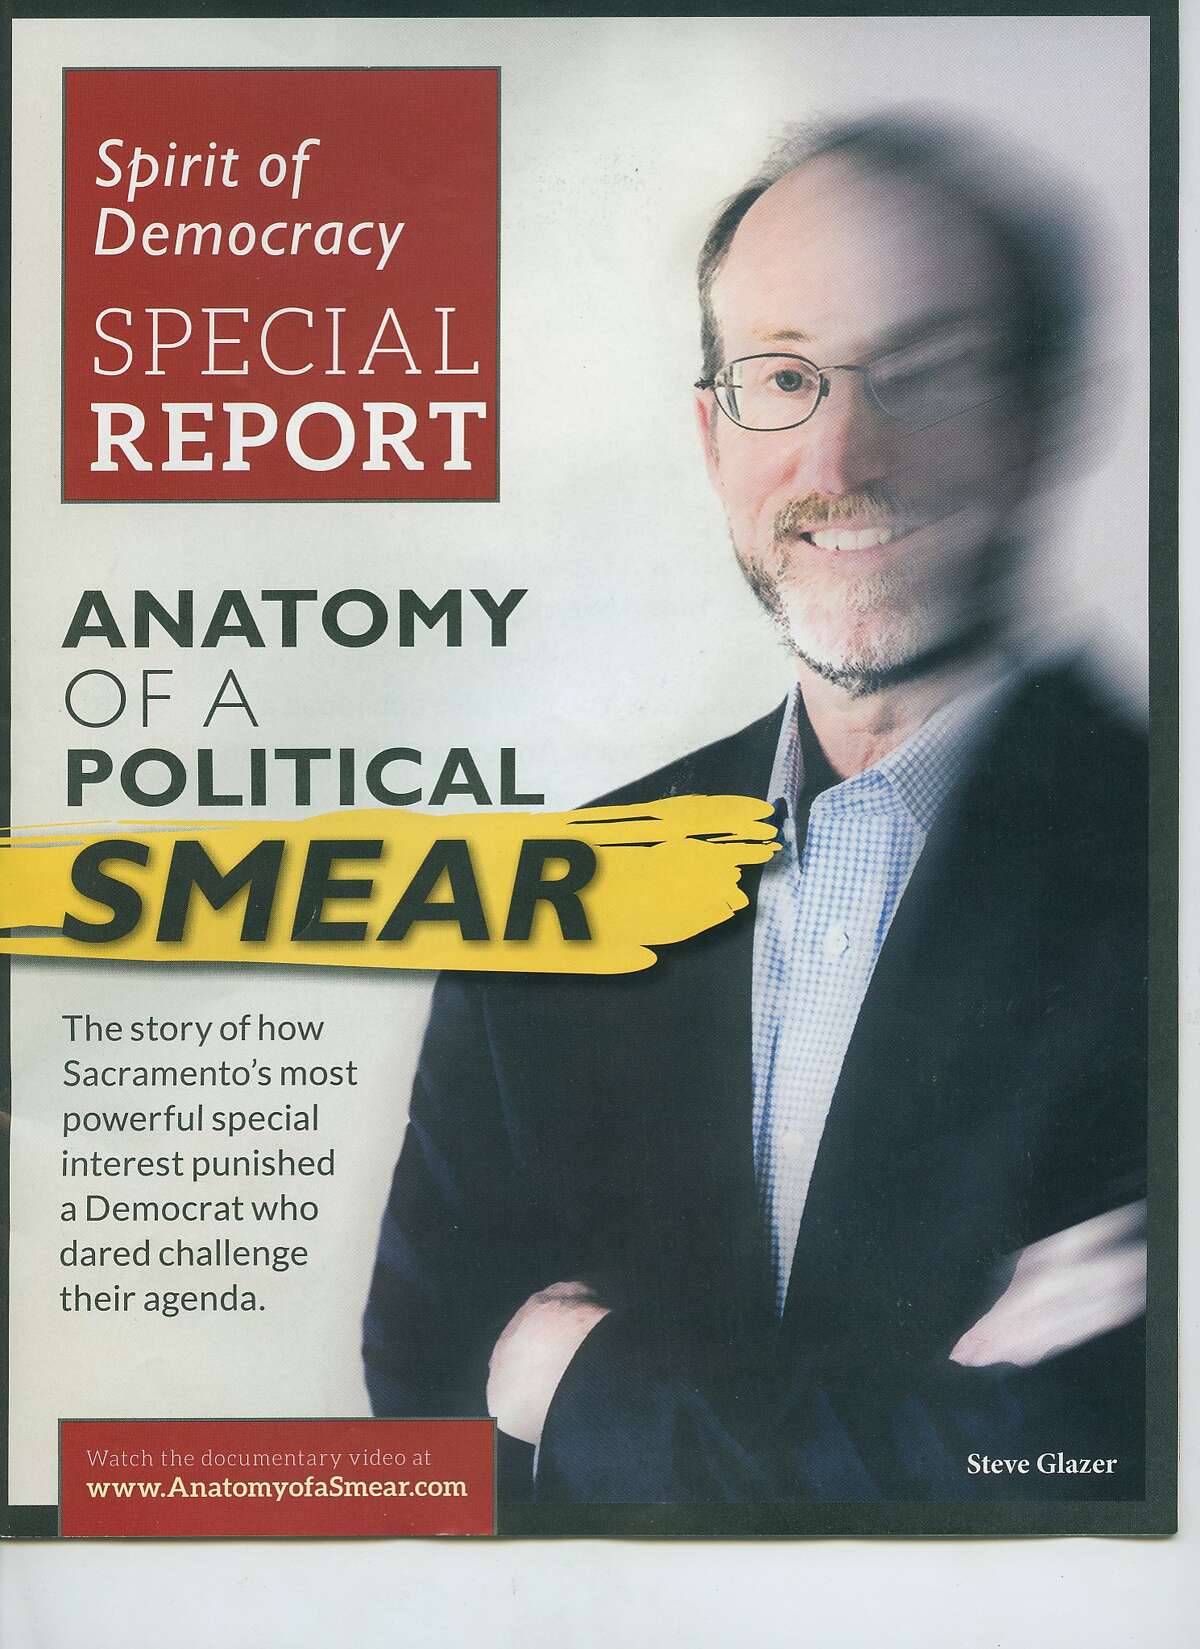 Cover shot of Anatomy of a Politcal Smear .. a smeared picture of Steve Glazer on the cover Handout